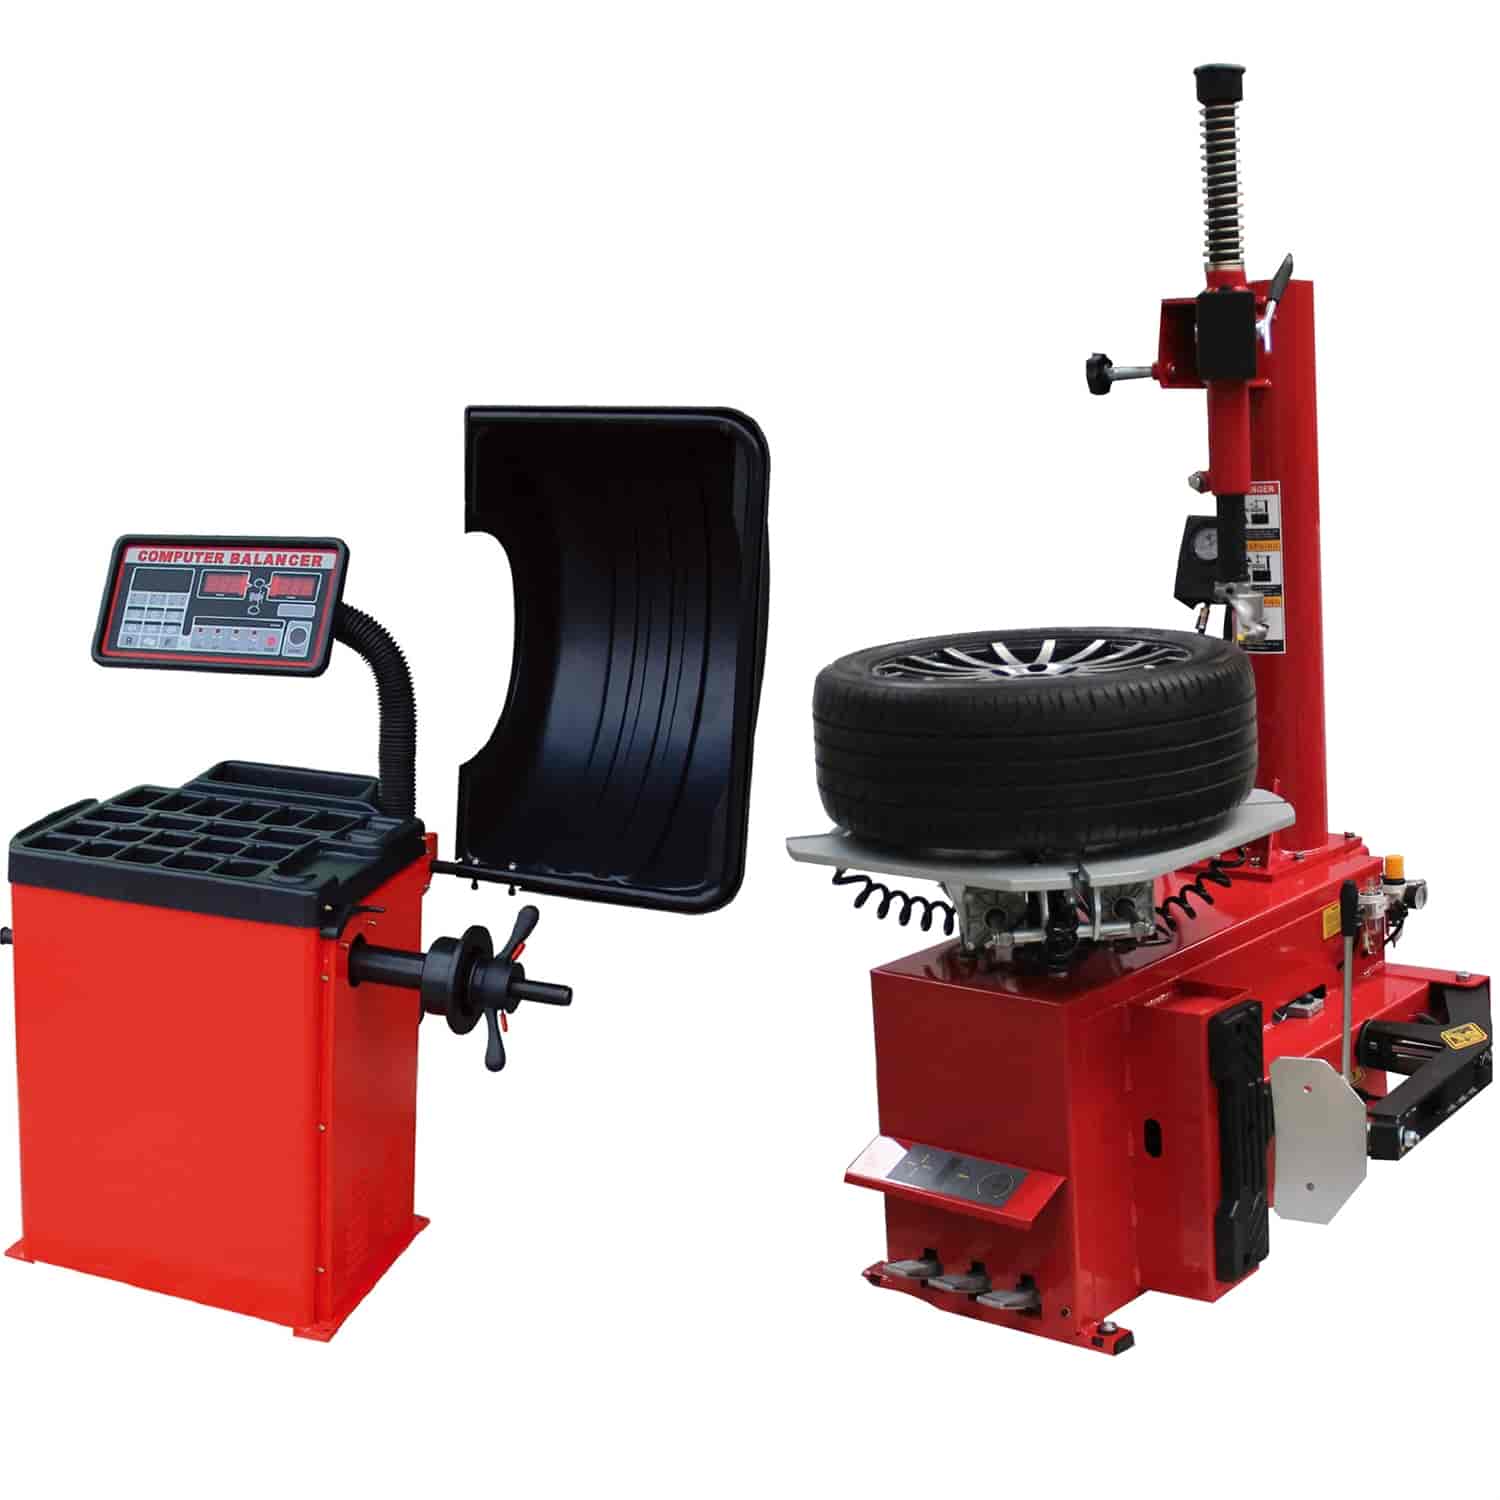 Tire Changer and Wheel Balancer Combo [Includes TC-950